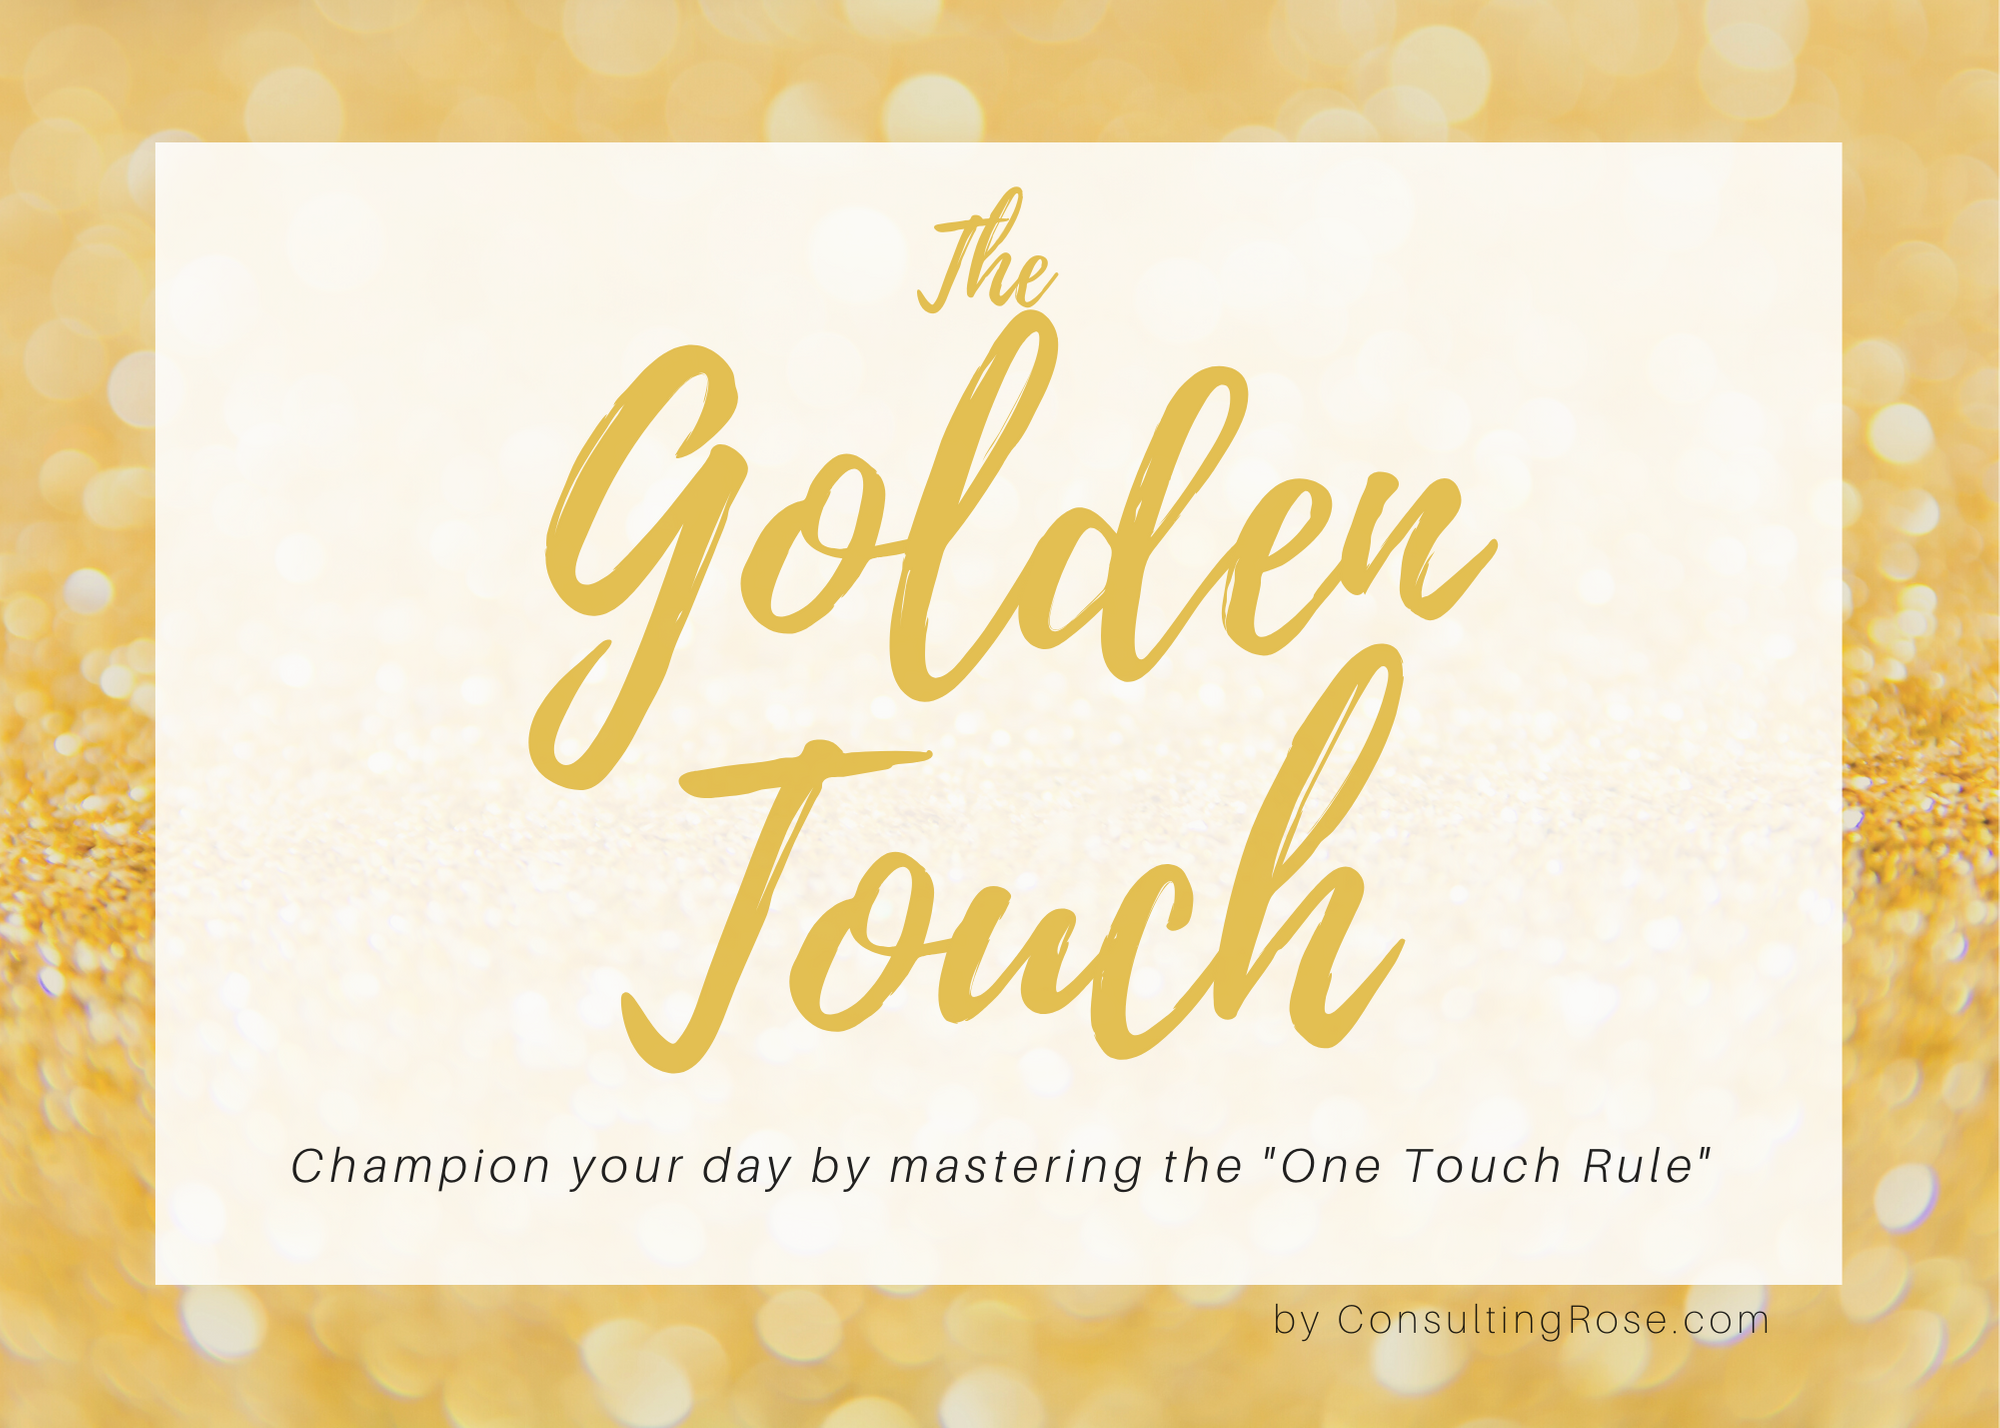 The Golden Touch: Champion Your Day by Mastering the One Touch Rule
								